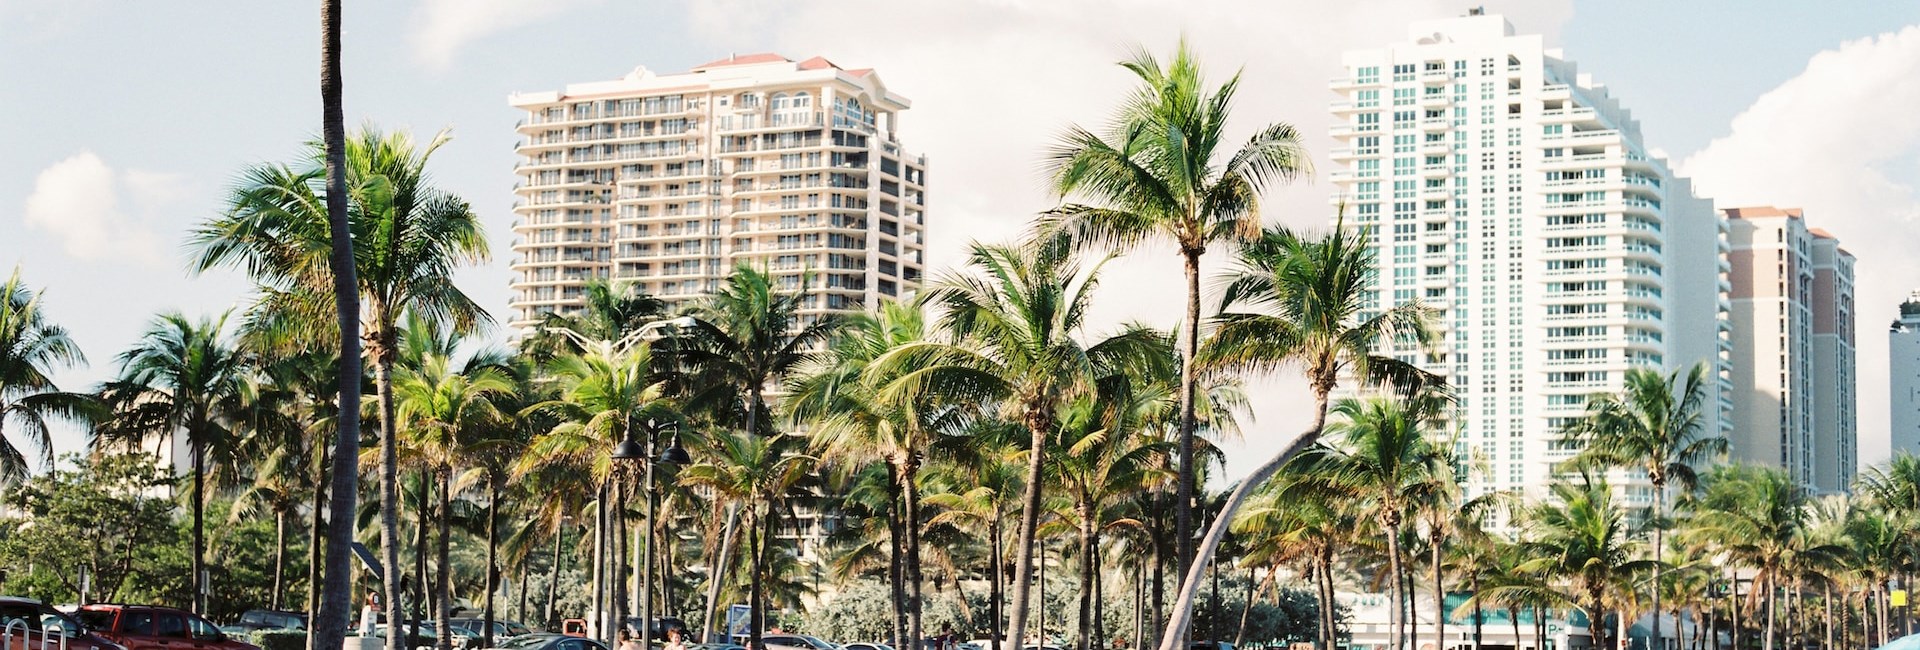 Tall palm trees on the beach with hotel buildings in the background